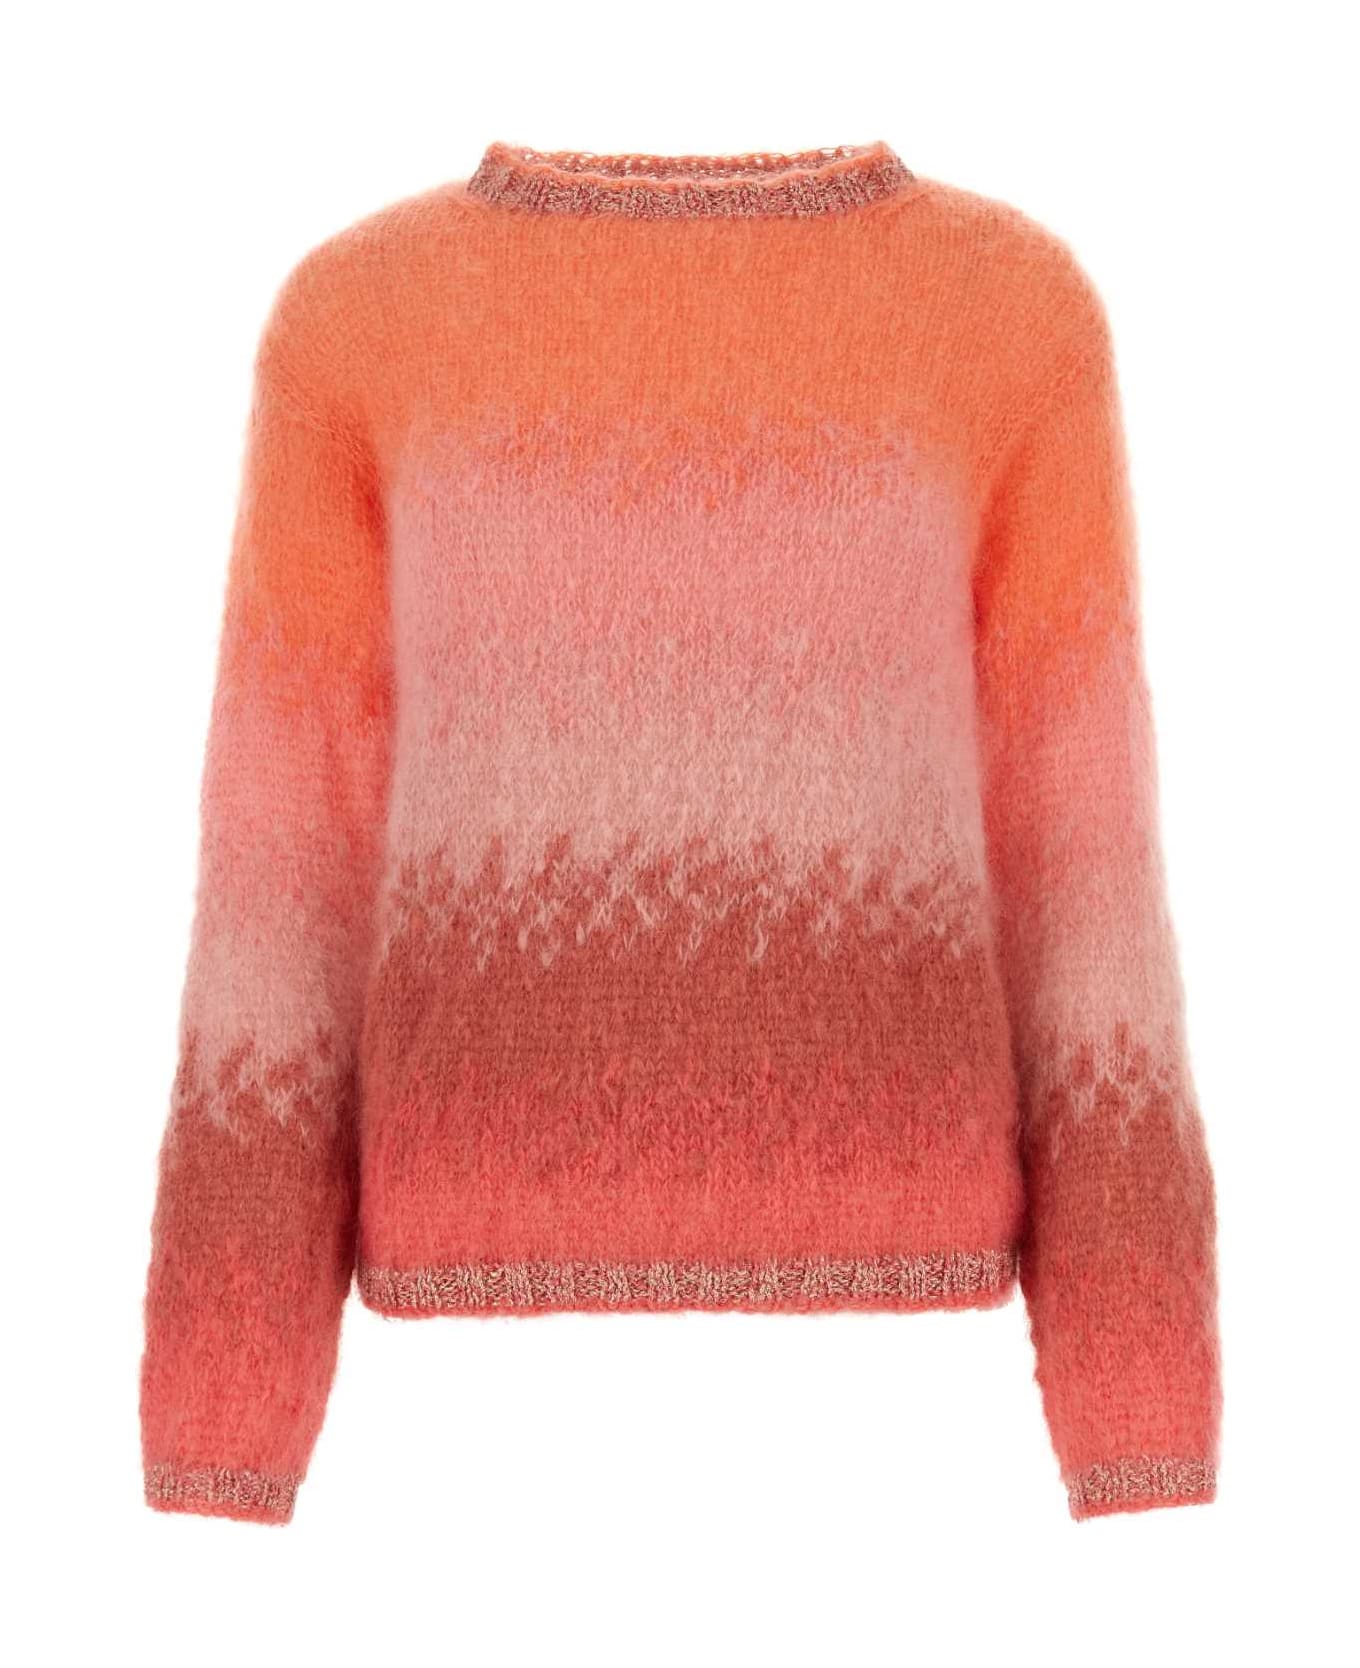 Rose Carmine Embroidered Stretch Mohair Blend Sweater - BLUSH